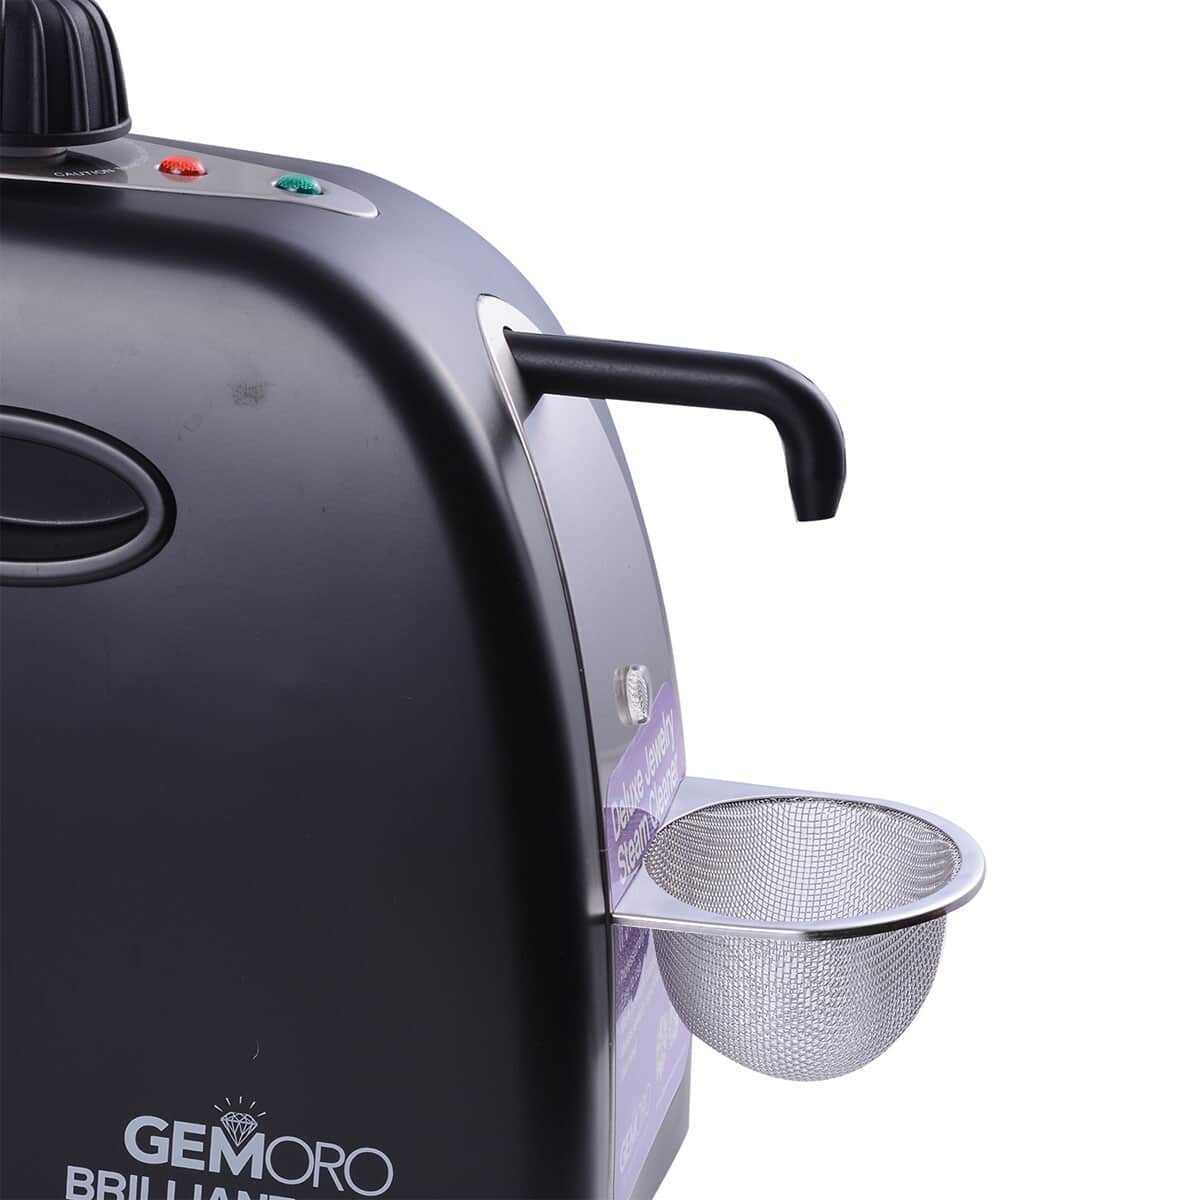 GEMORO Brilliant Spa Black Diamond: Deluxe Personal Jewelry Steam Cleaner image number 6